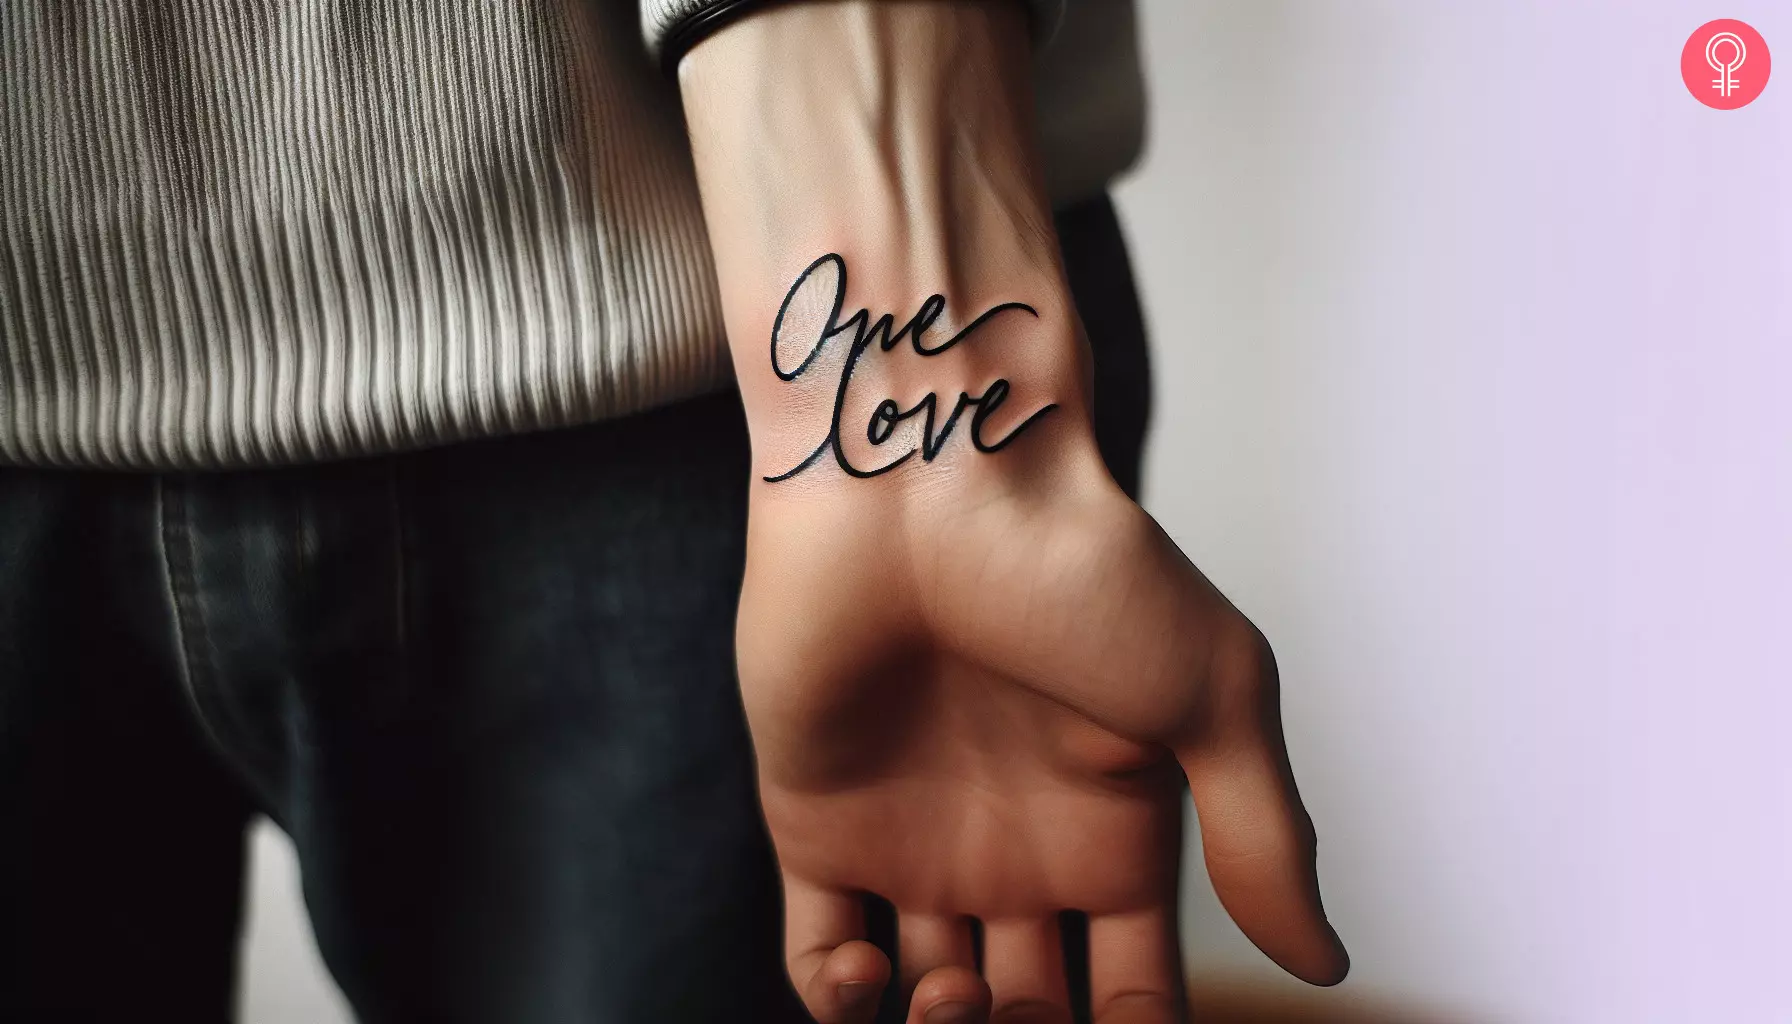 The words ‘one love’ inked on the wrist